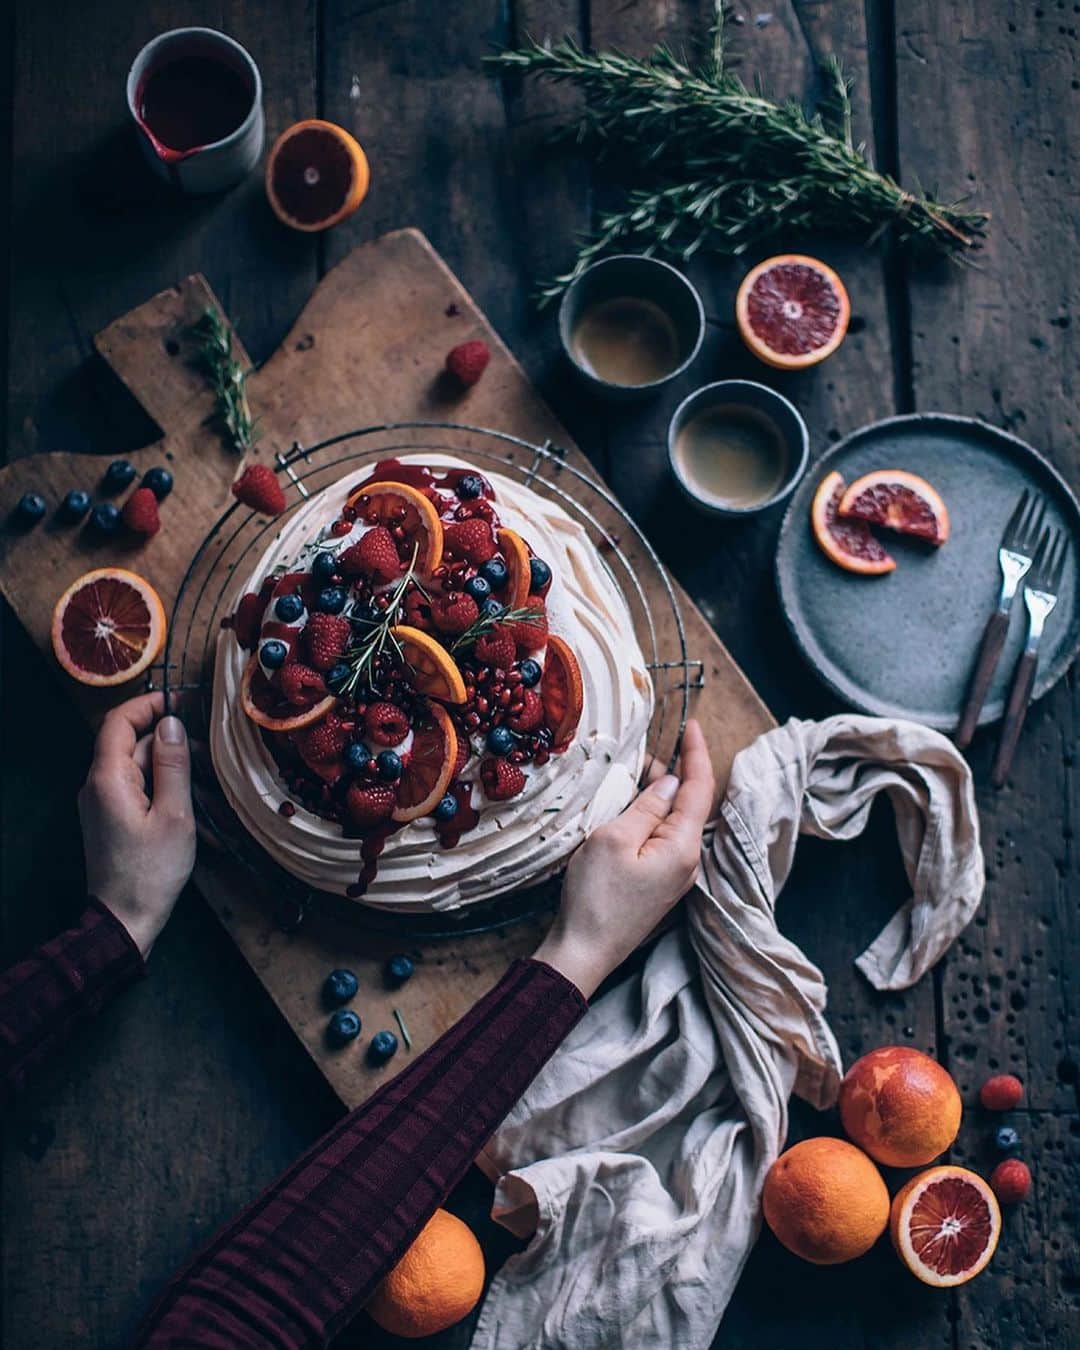 Our Food Storiesのインスタグラム：「This blood orange-berry pavlova is such a wonderful treat for these cold winter days 🤗 Get the recipe on the blog, link is in profile. #ourfoodstories  ____ #bloodorange #pavlova #sweetbaking #bakinglove #glutenfreedessert #glutenfri #glutenfrei #glutenfreerecipes #momentslikethese #foodstylist #foodphotographer #germanfoodblogger #fellowmag #simplejoys」